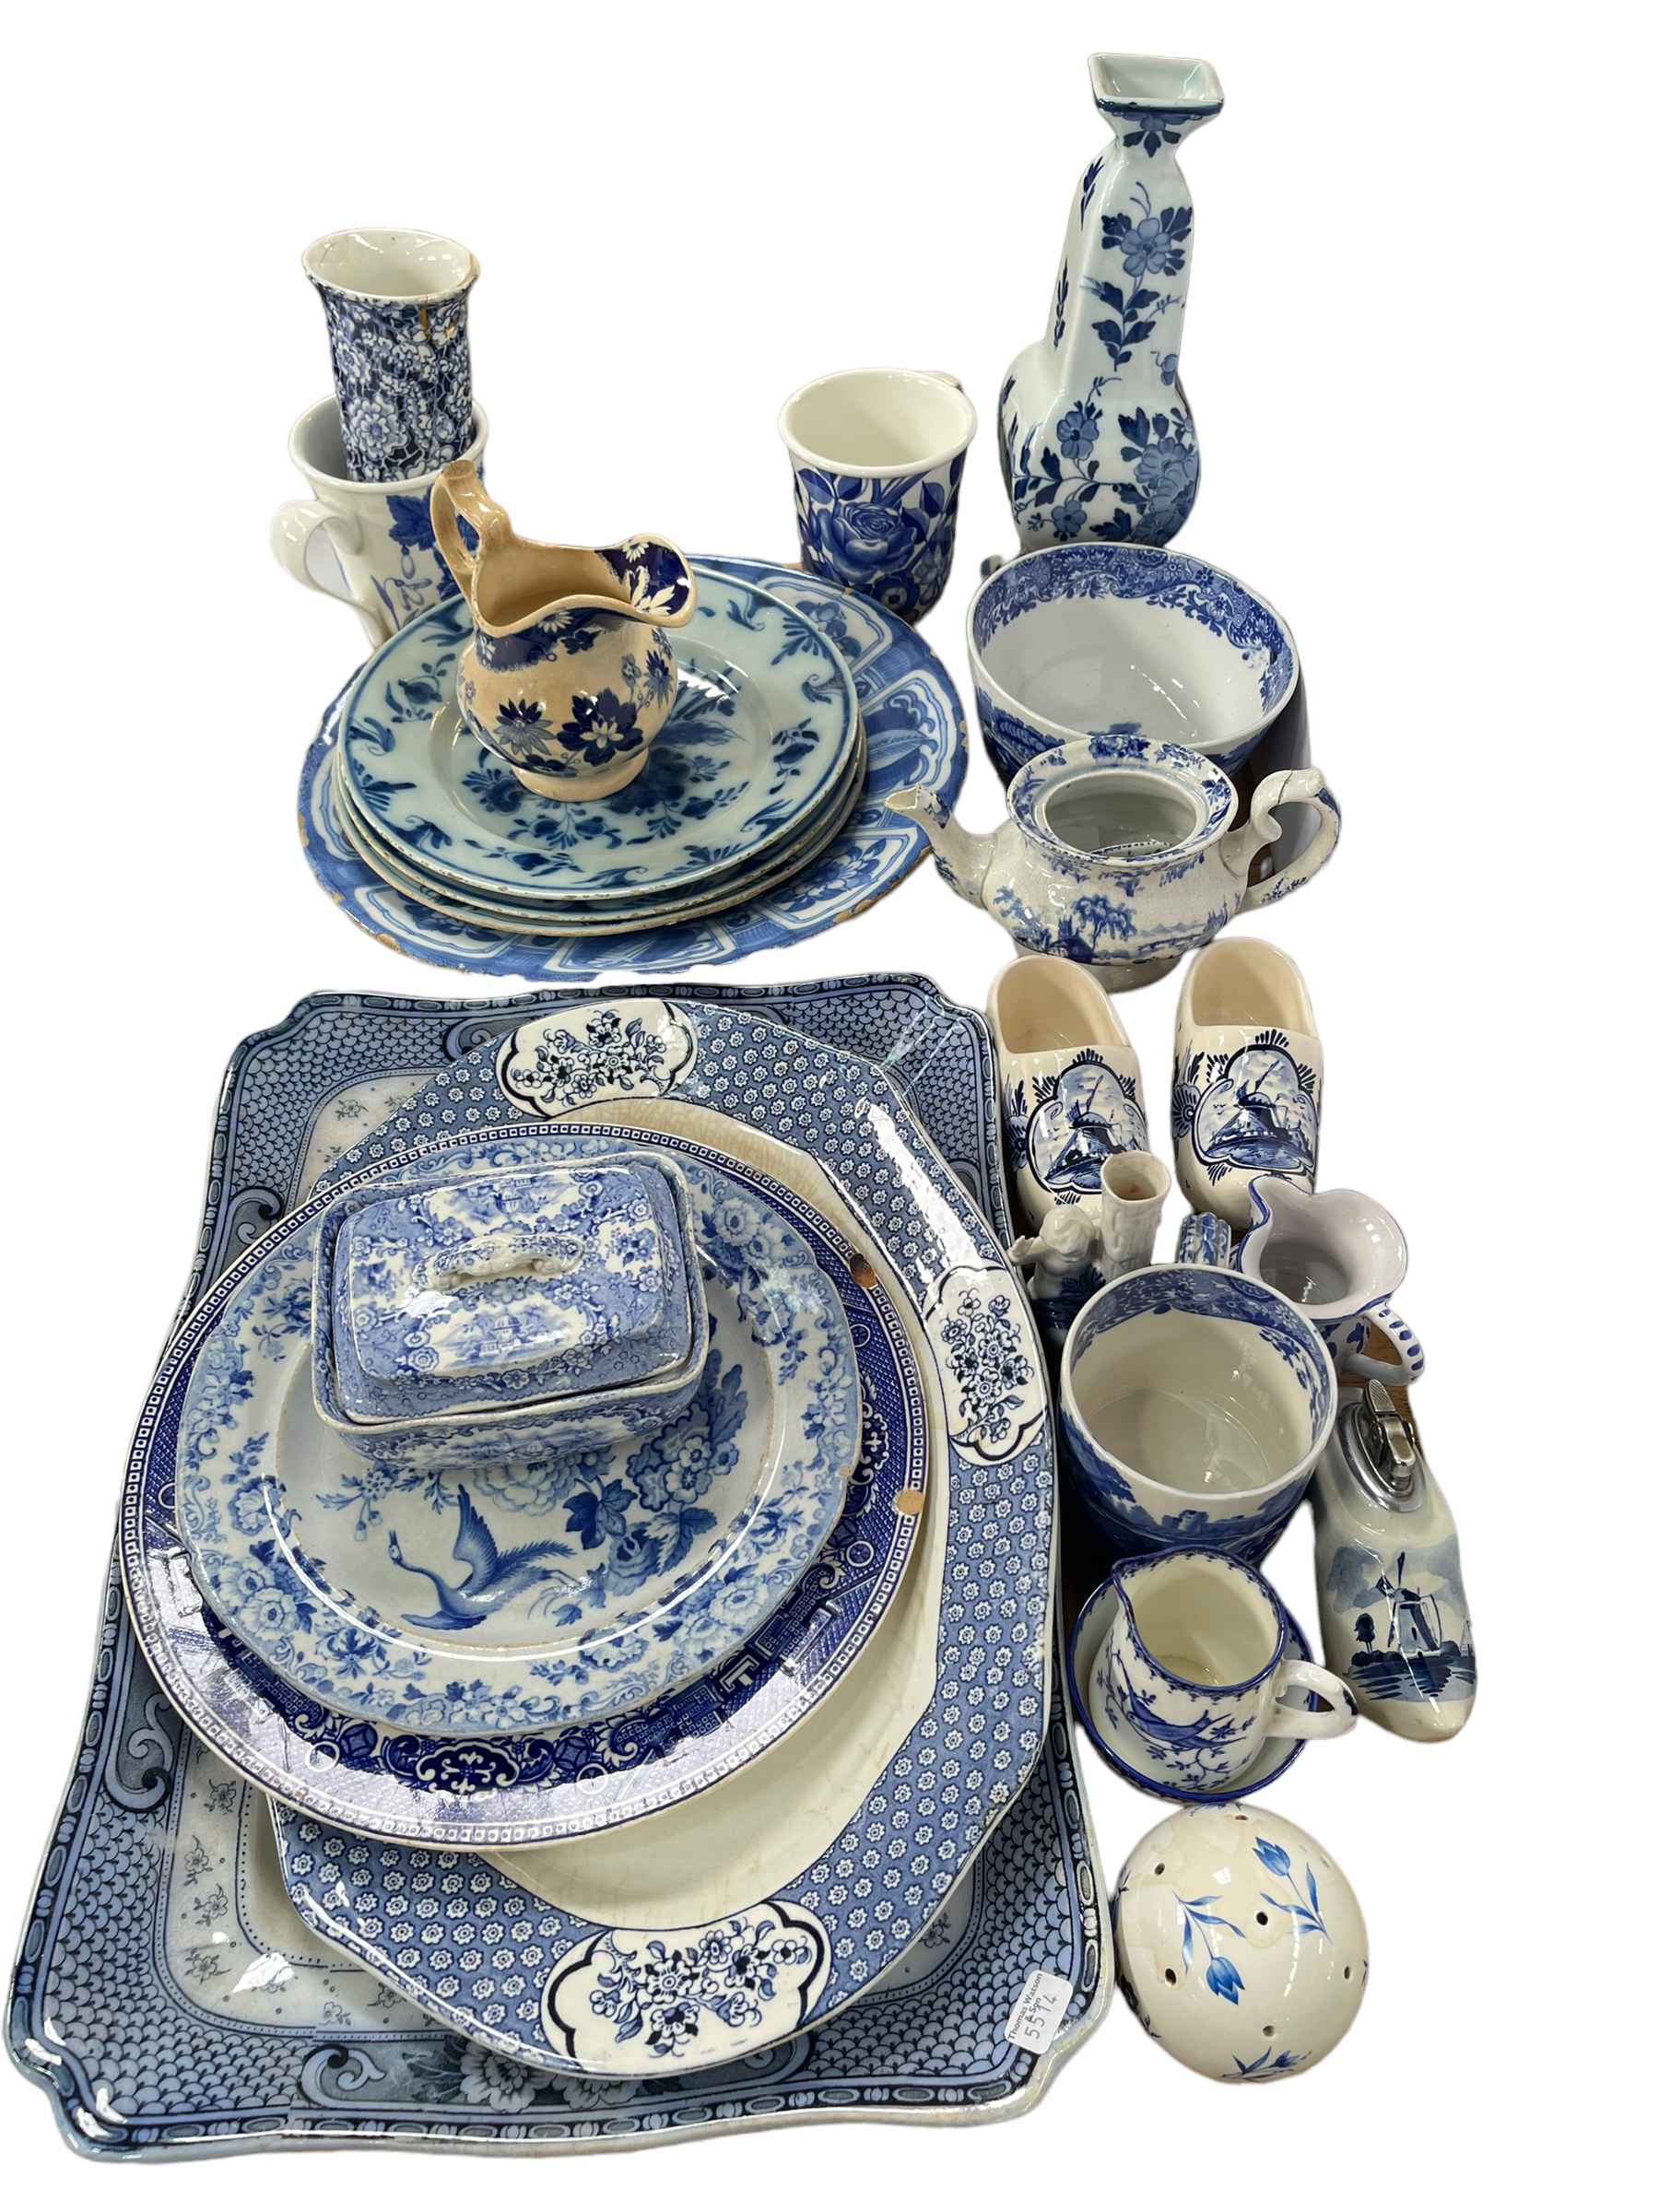 Collection of early blue and white porcelain, Copeland Spode, Delft, etc.